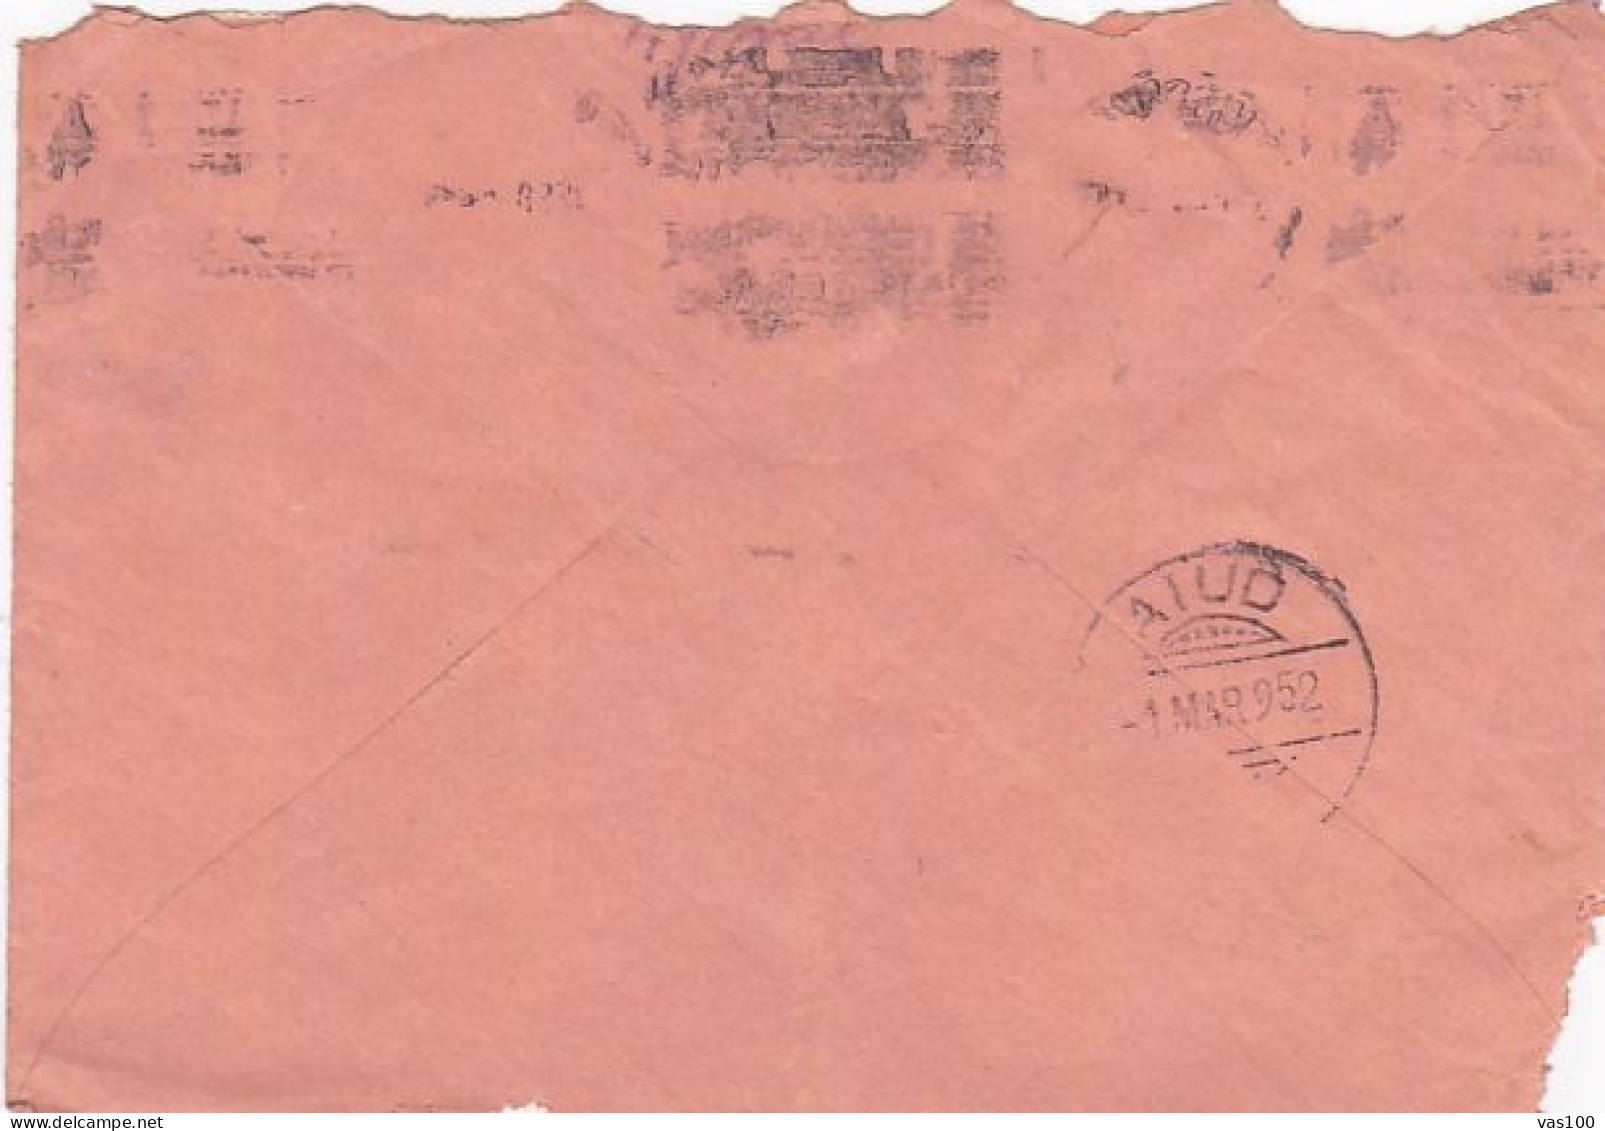 ION LUCA CARAGIALE- WRITER, 55 BANI OVERPRINT STAMP ON COVER, 1952, ROMANIA - Storia Postale